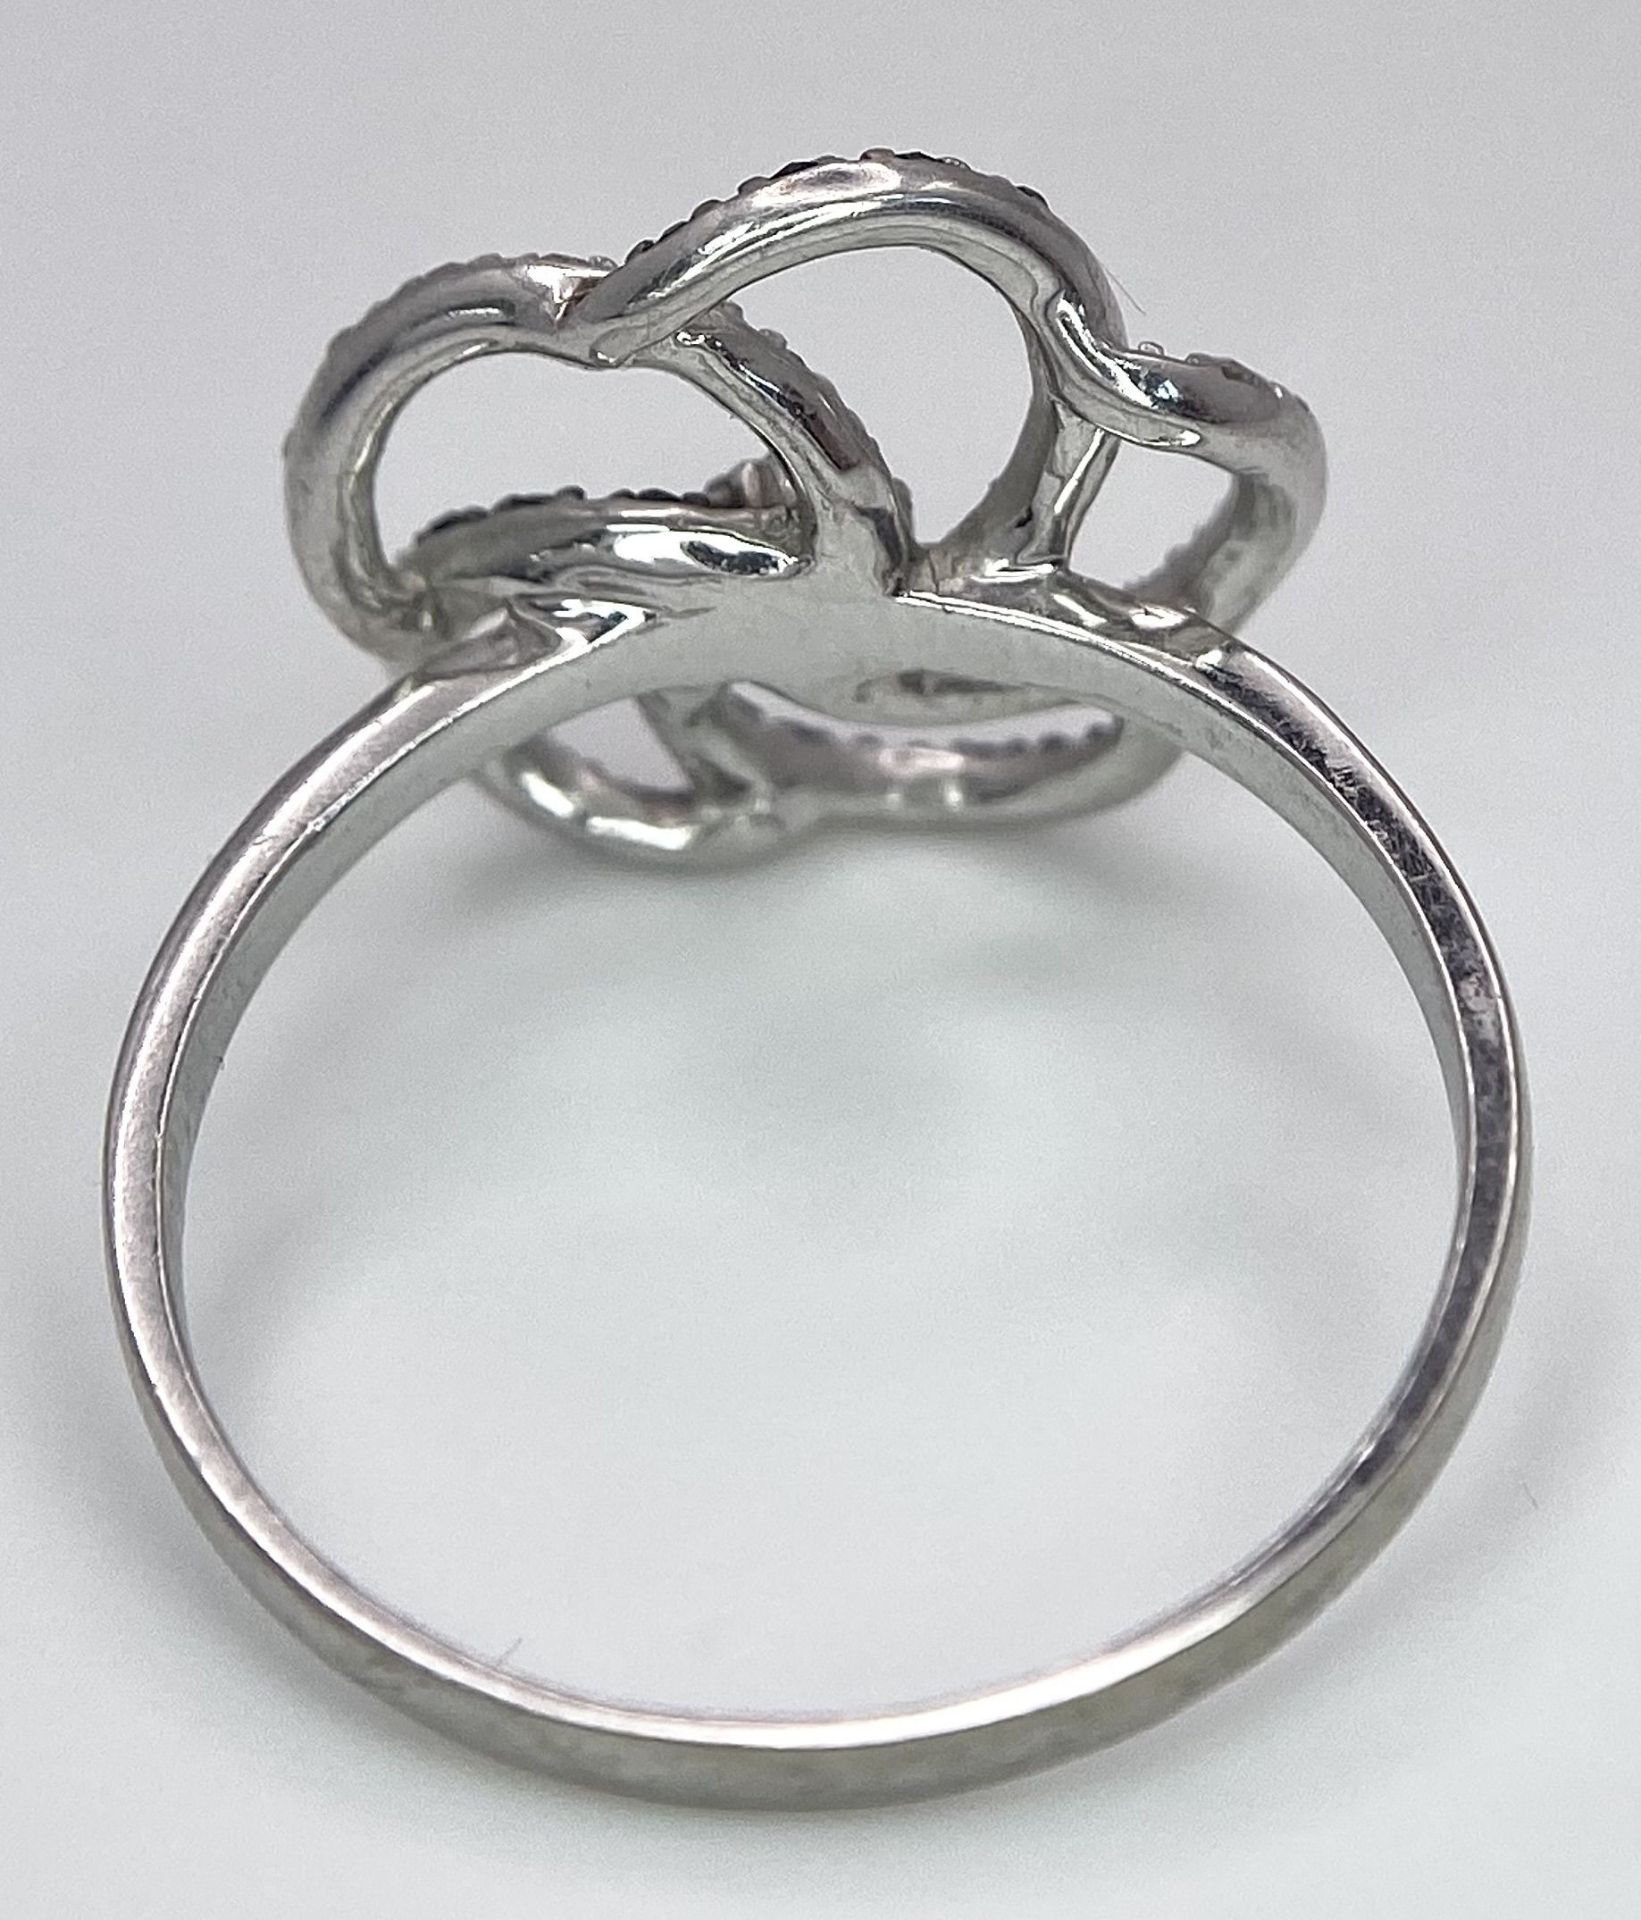 A 9K White Gold Black ad White Diamond Decorative Floral Ring. Size N. 2g total weight. - Image 4 of 7